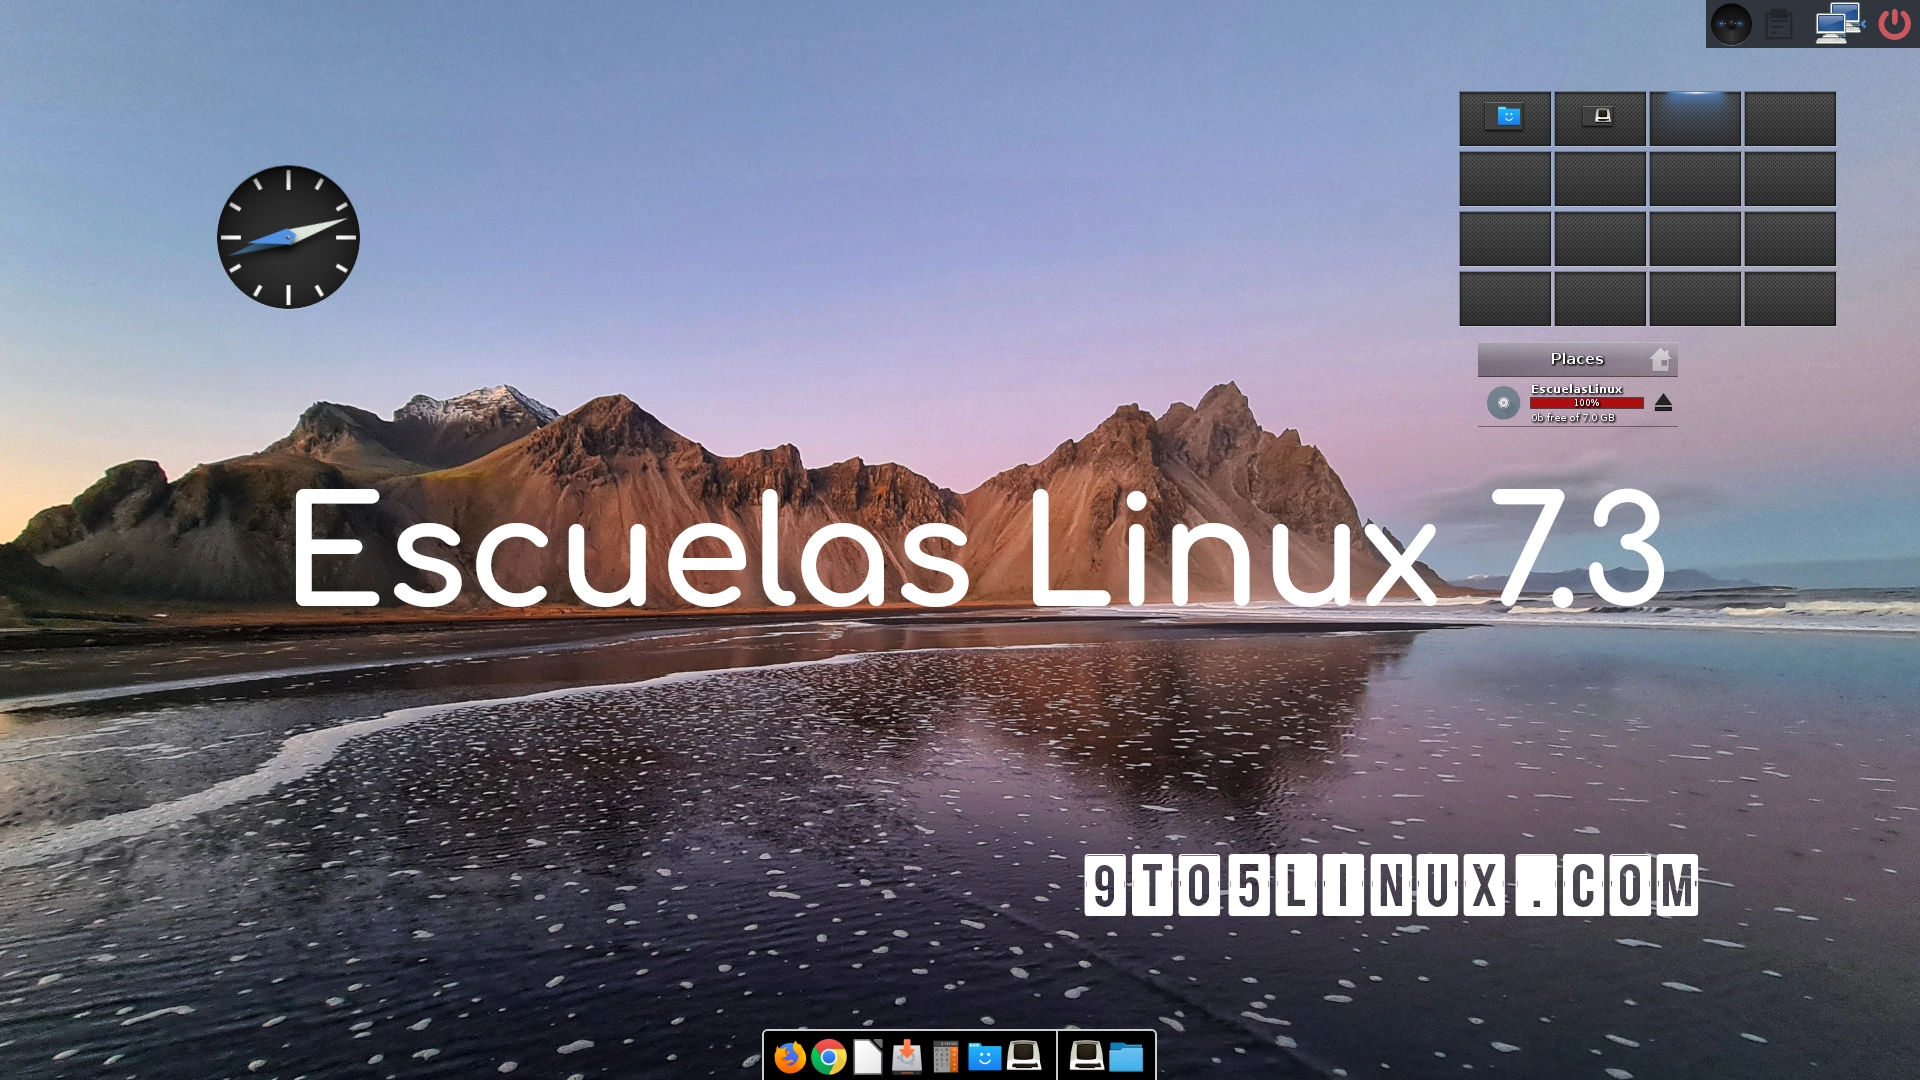 Educational Distro Escuelas Linux 7.3 Is Here with Linux 5.15 LTS, LibreOffice 7.3, and More